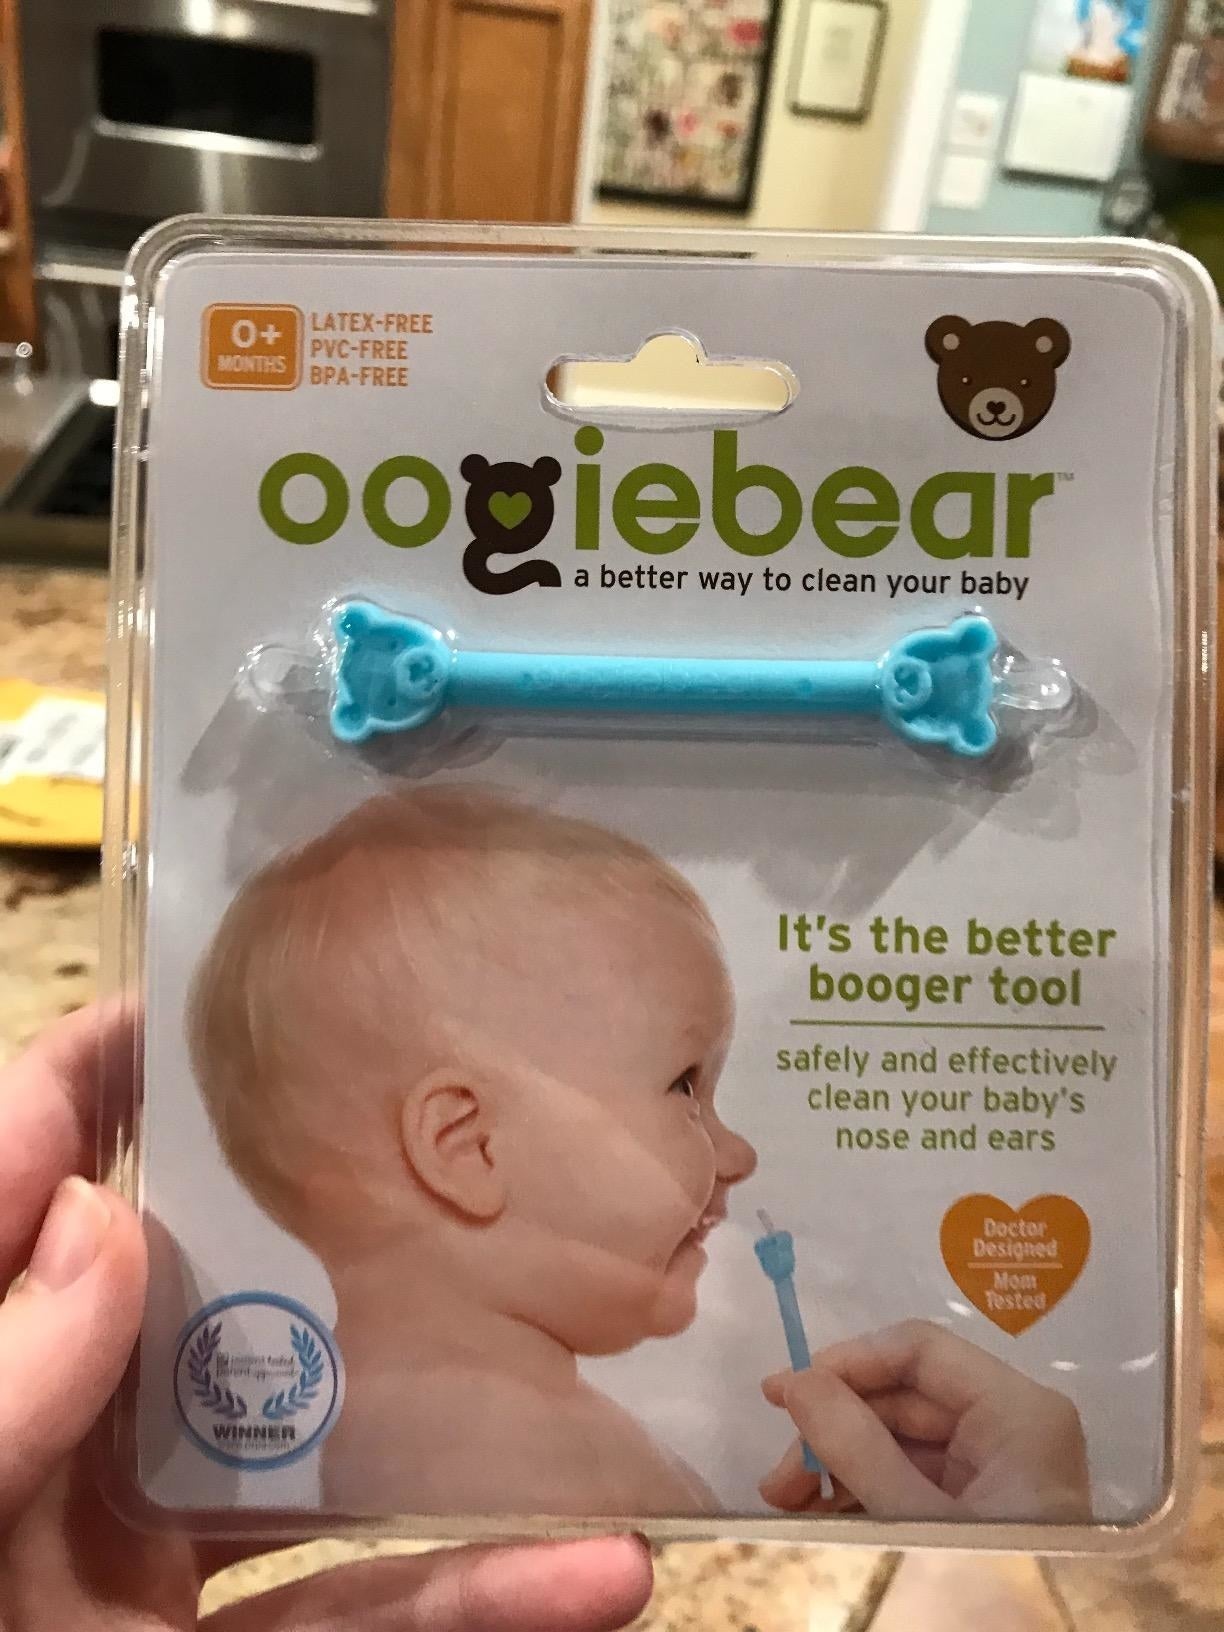  oogiebear Brite - Baby Nose Cleaner and Ear Wax Removal Tool.  Baby Gadget with Nighttime LED Light. Safe Snot Booger Picker for Newborns,  Infants & Toddlers : Baby